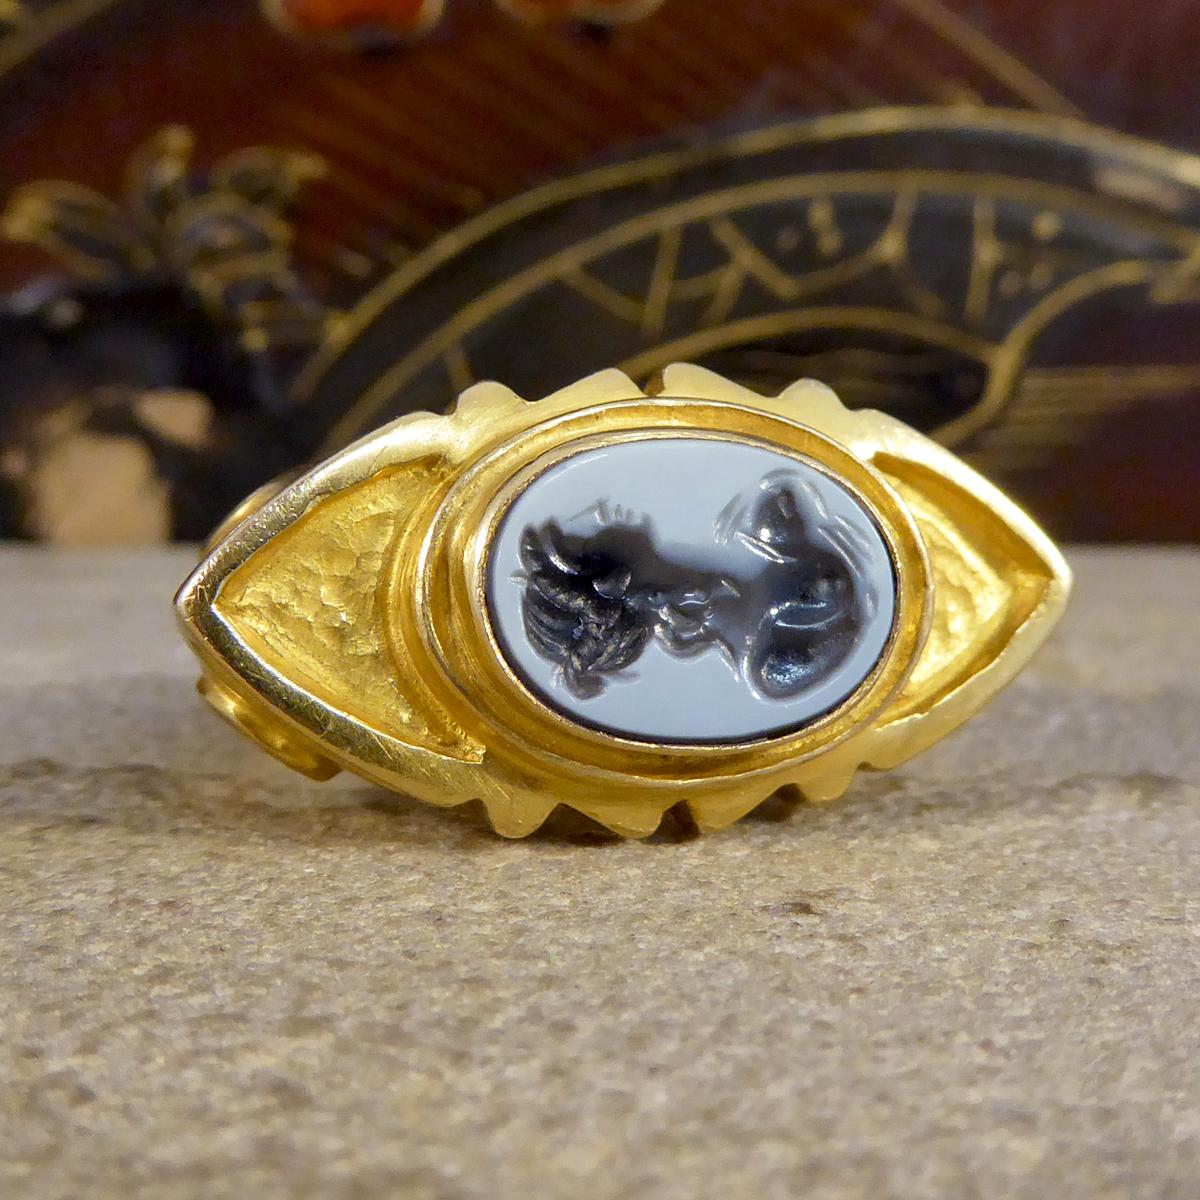 This heavy antique ring is very large in size hand crafted in the Victorian era. It features Carved Agate in the centre depicting a females silhouette in a rob over setting. Fully made from 18ct Yellow Gold, this ring has a beautiful gallery and